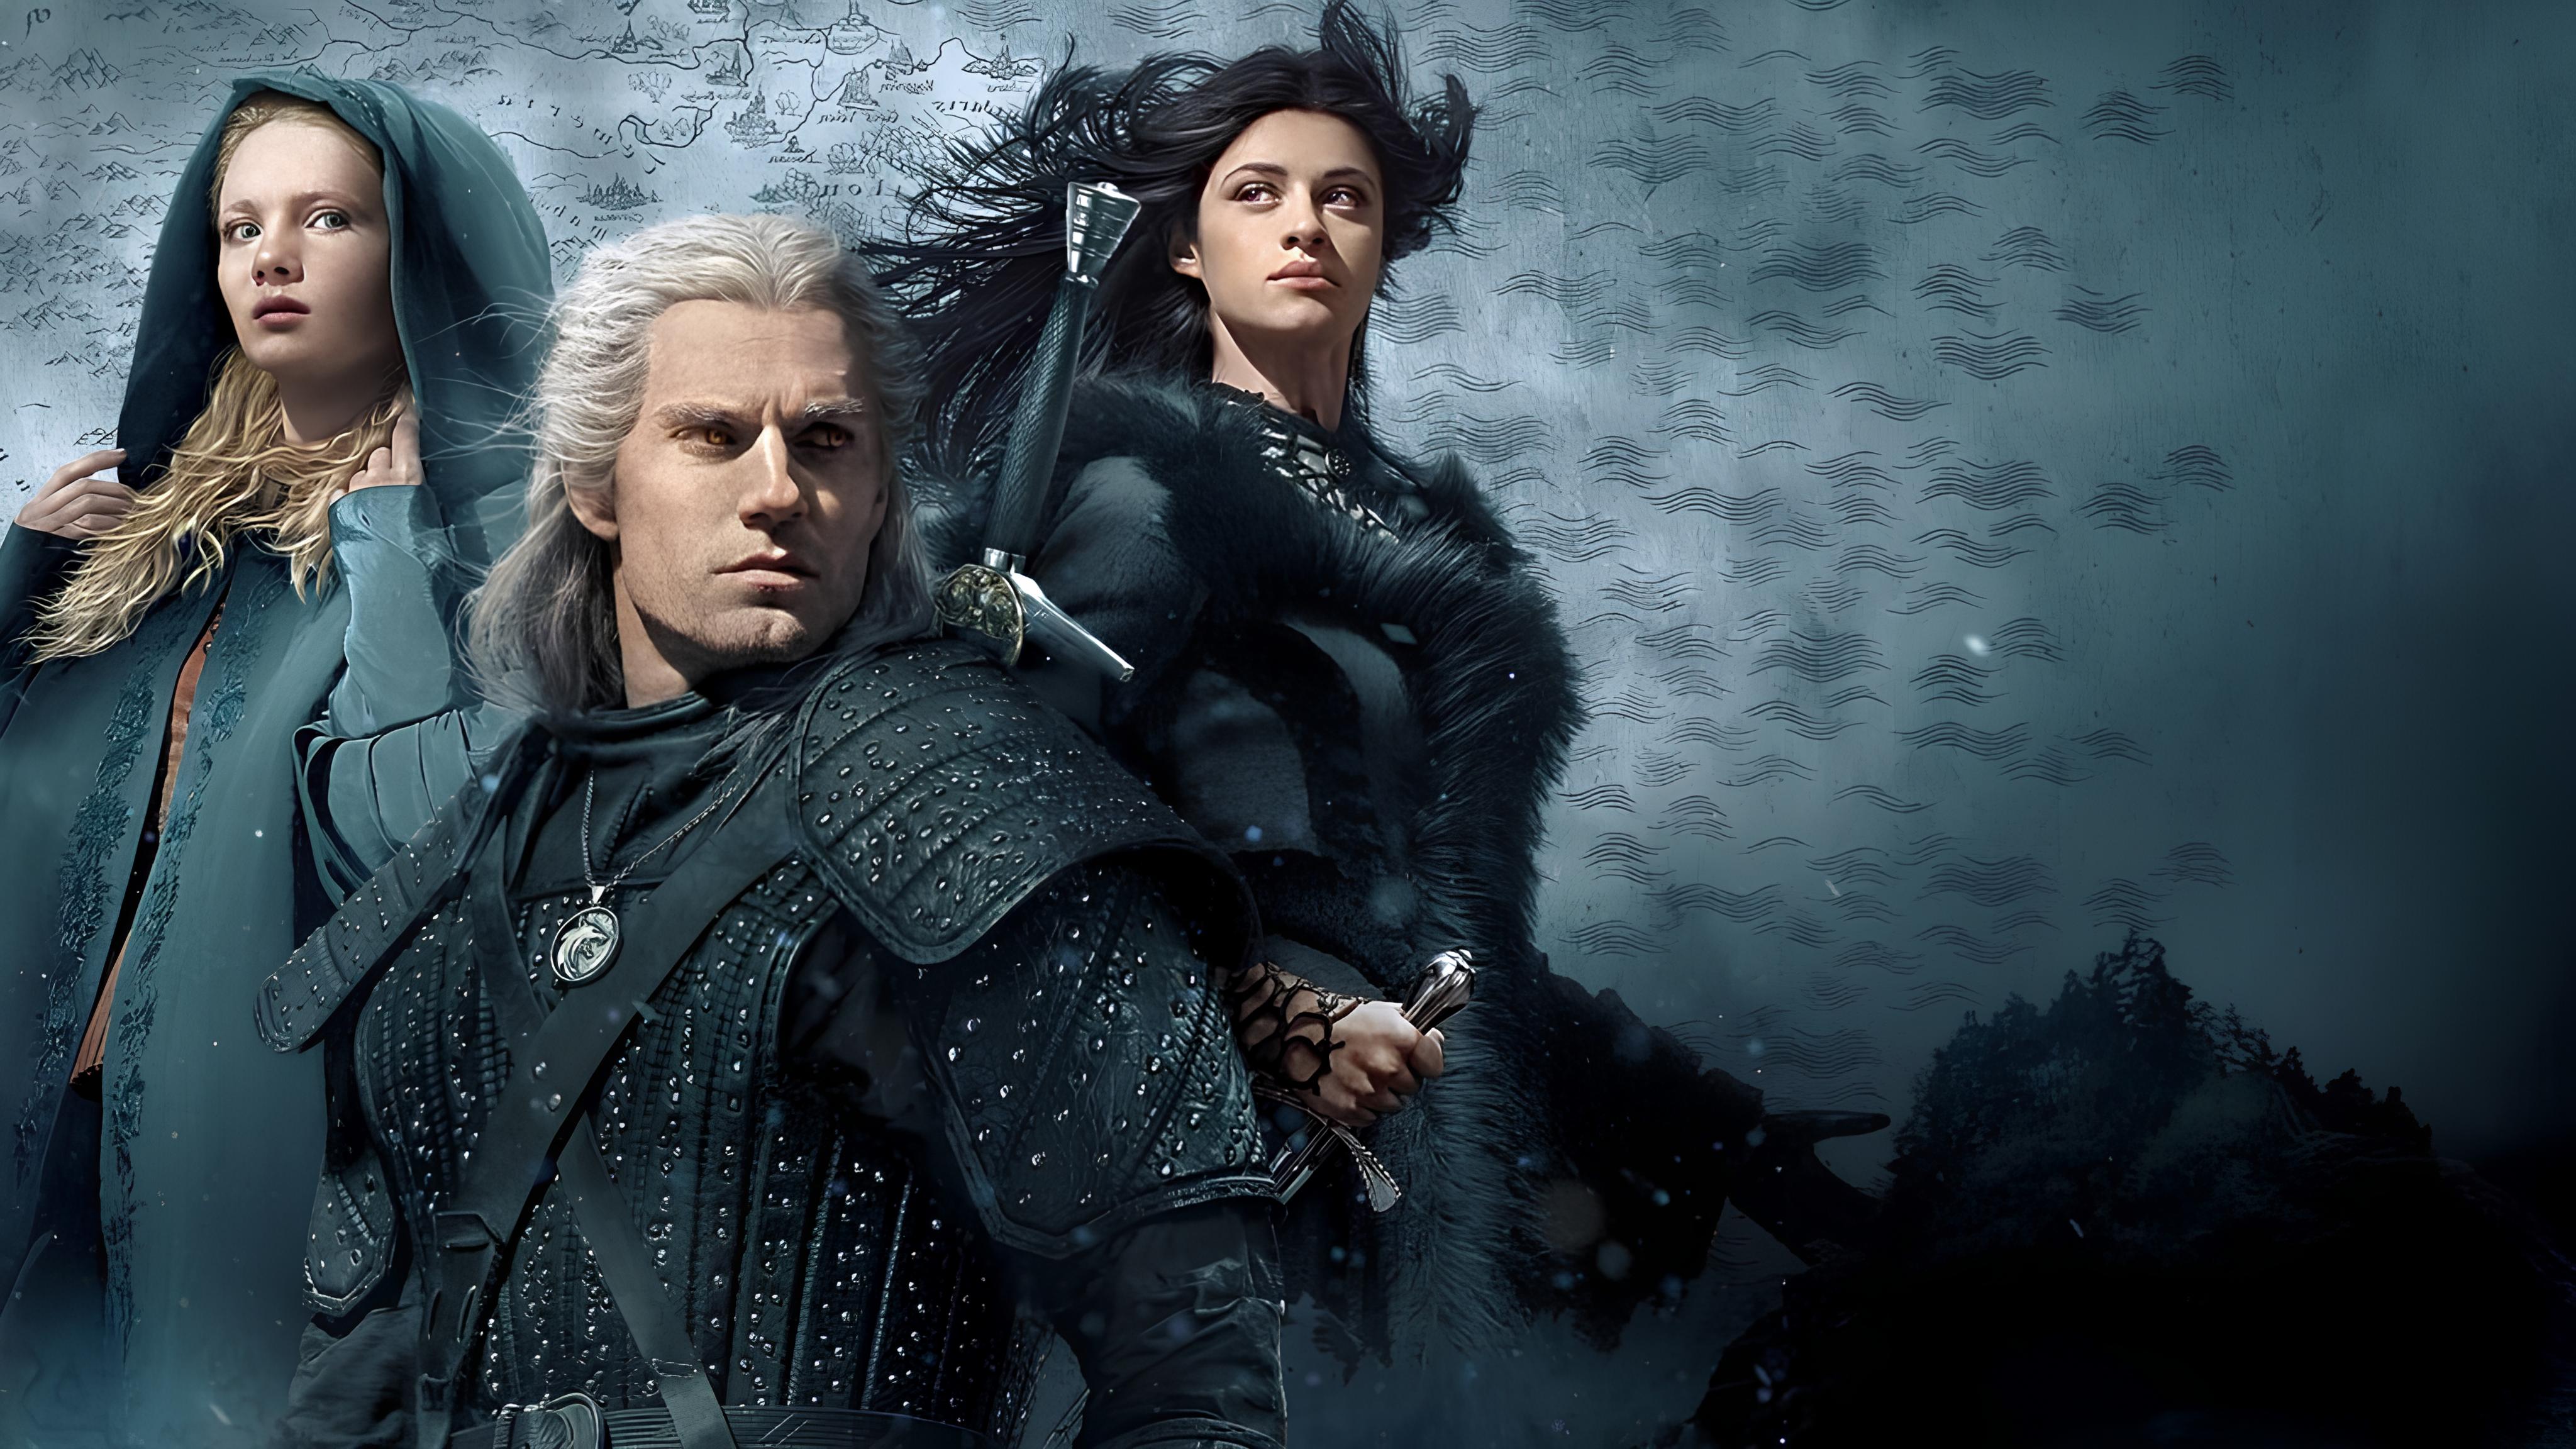 Behold, the complete CAST - The Witcher - Netflix Series